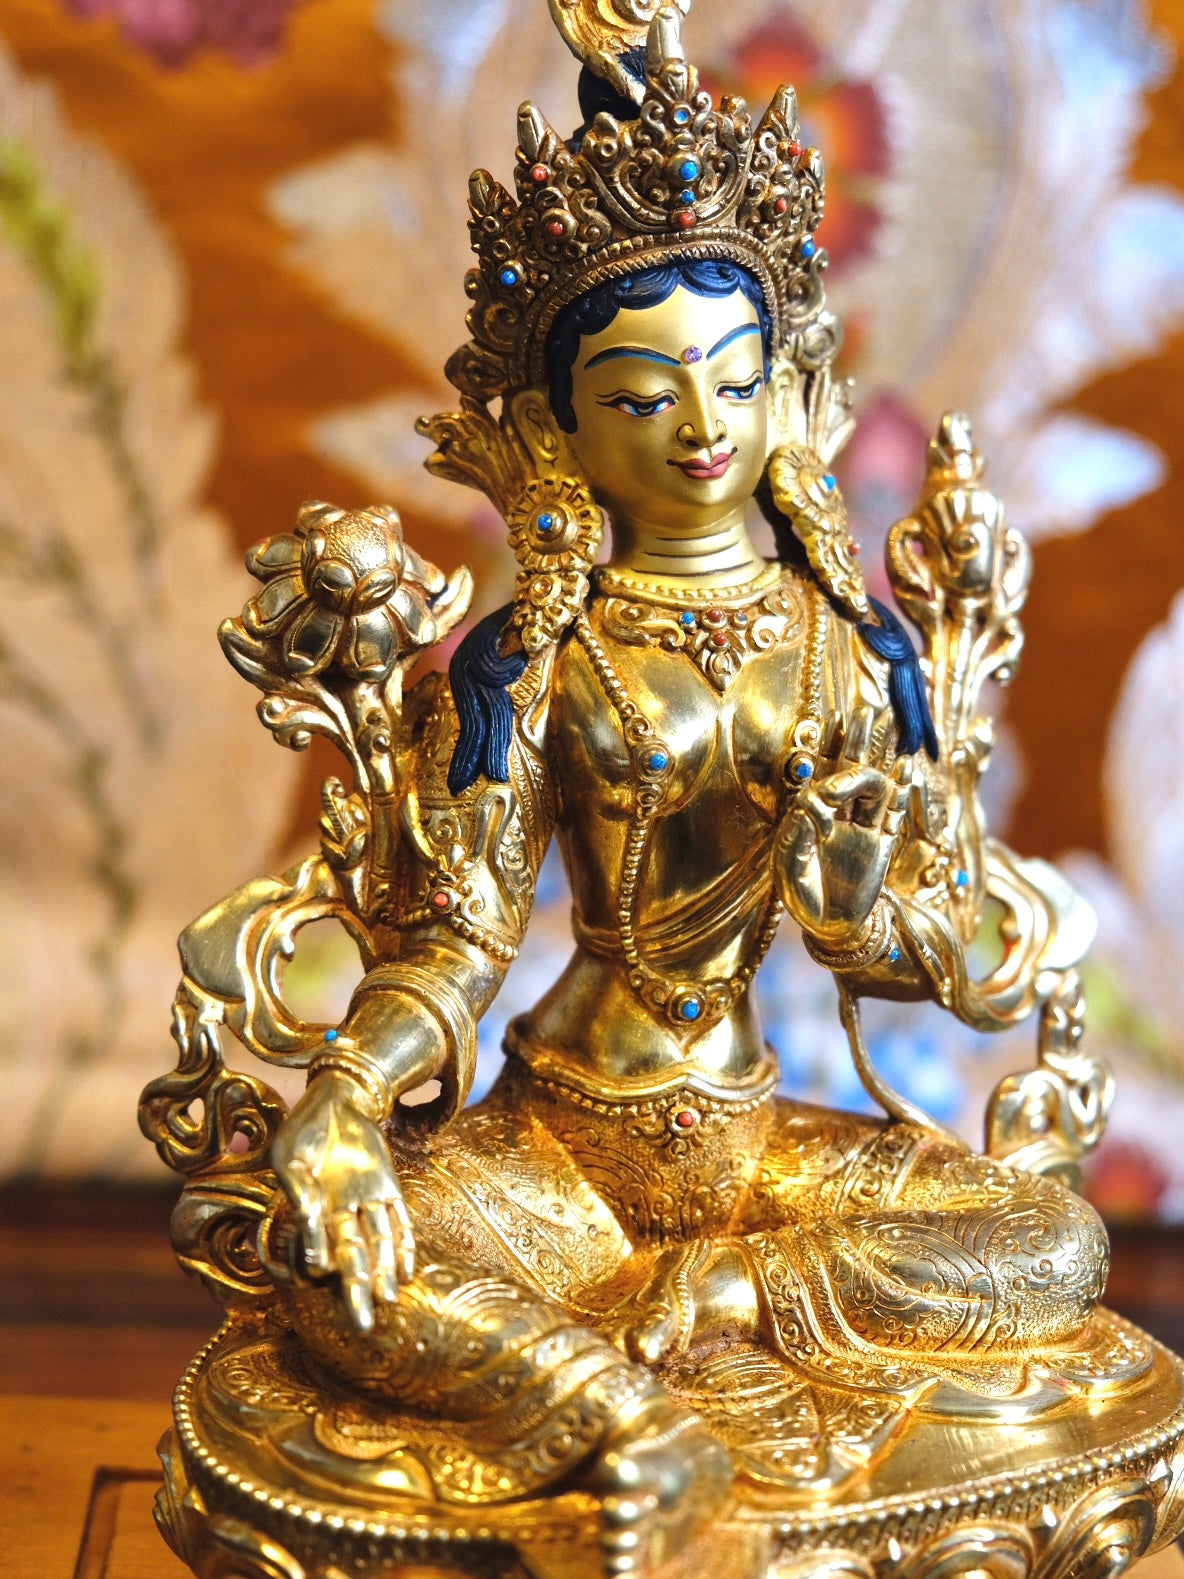 Portrait photo showing details in Tara statue (gold plated)